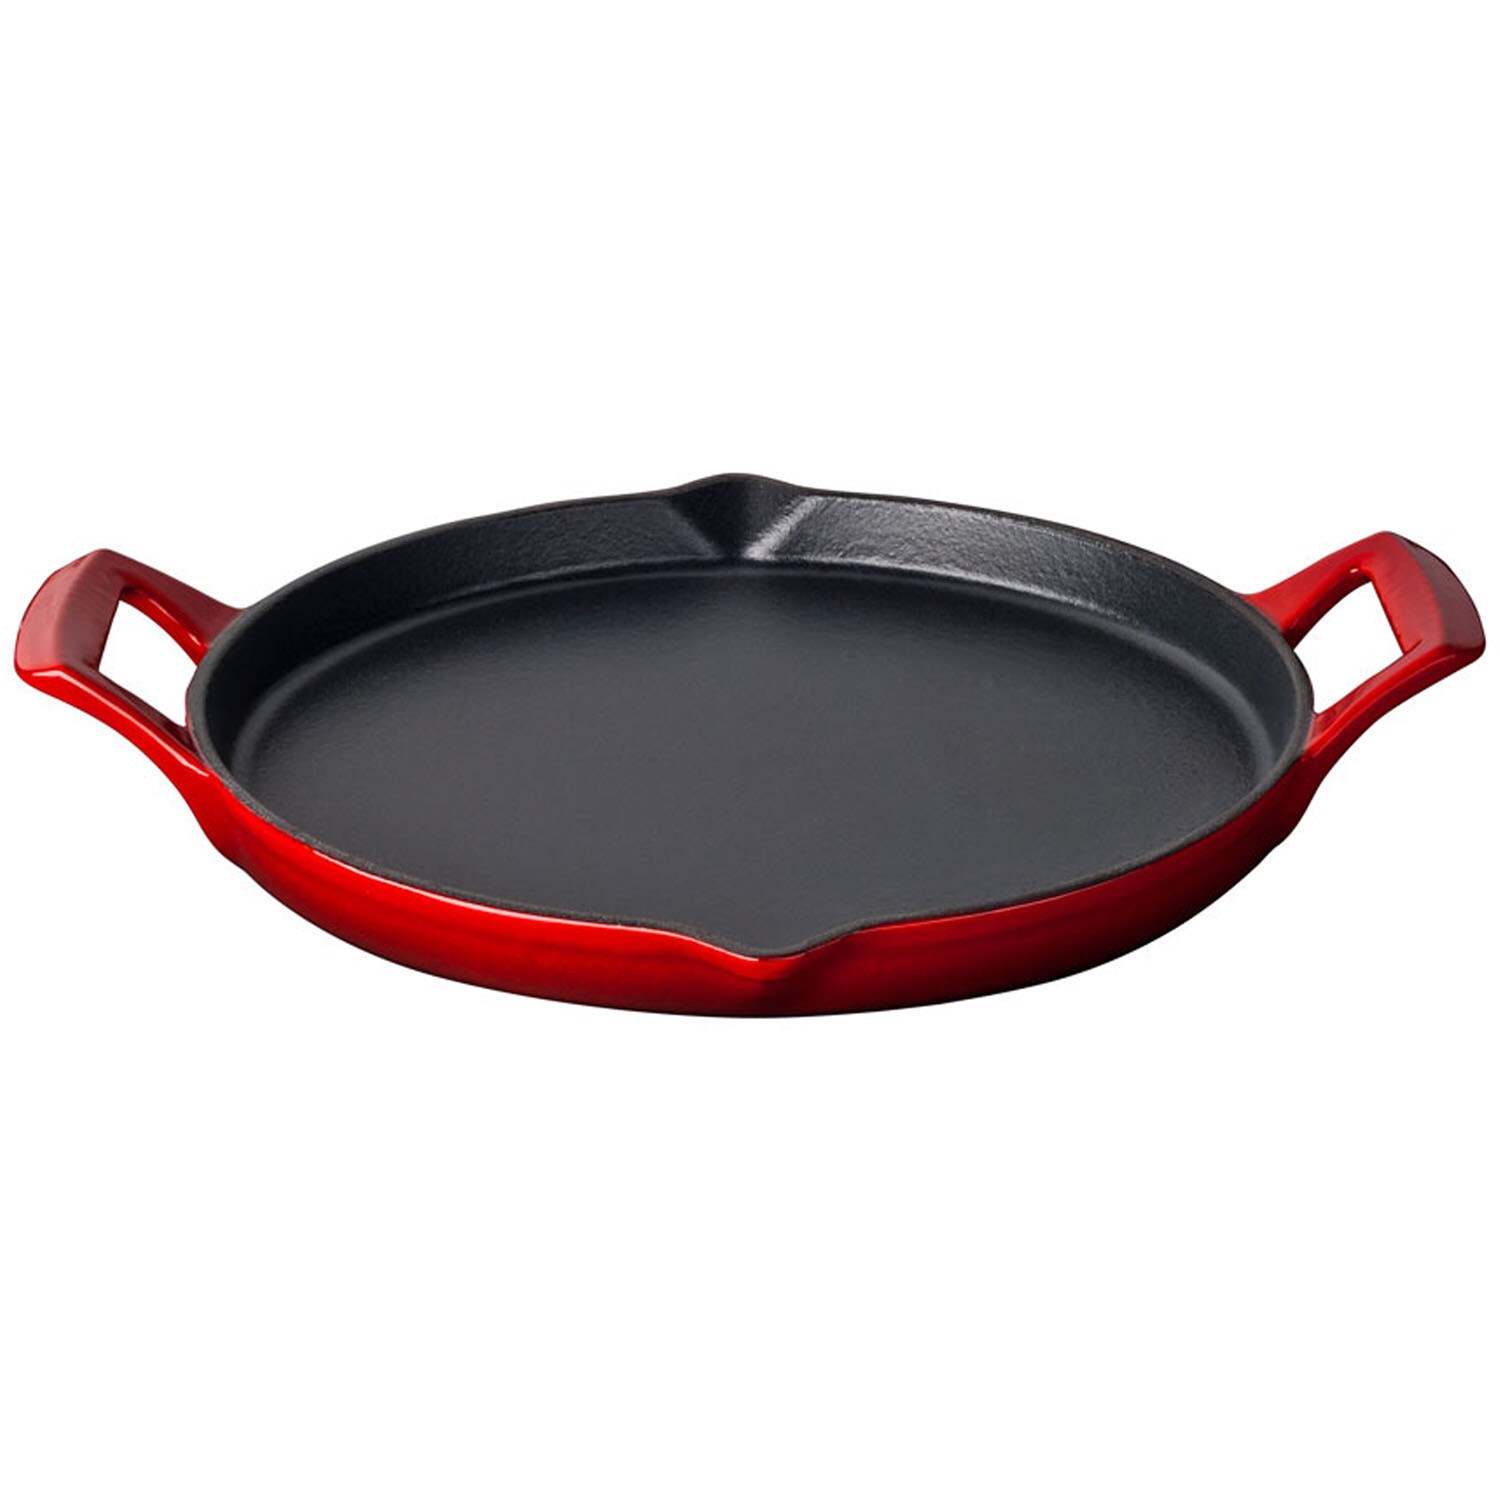 https://ak1.ostkcdn.com/images/products/12343482/La-Cuisine-Round-12-In.-Cast-Iron-Shallow-Griddle-with-2-Wedge-Handles-and-Enamel-Finish-Red-a1cbc423-6438-4768-9872-e053d8343e4d.jpg